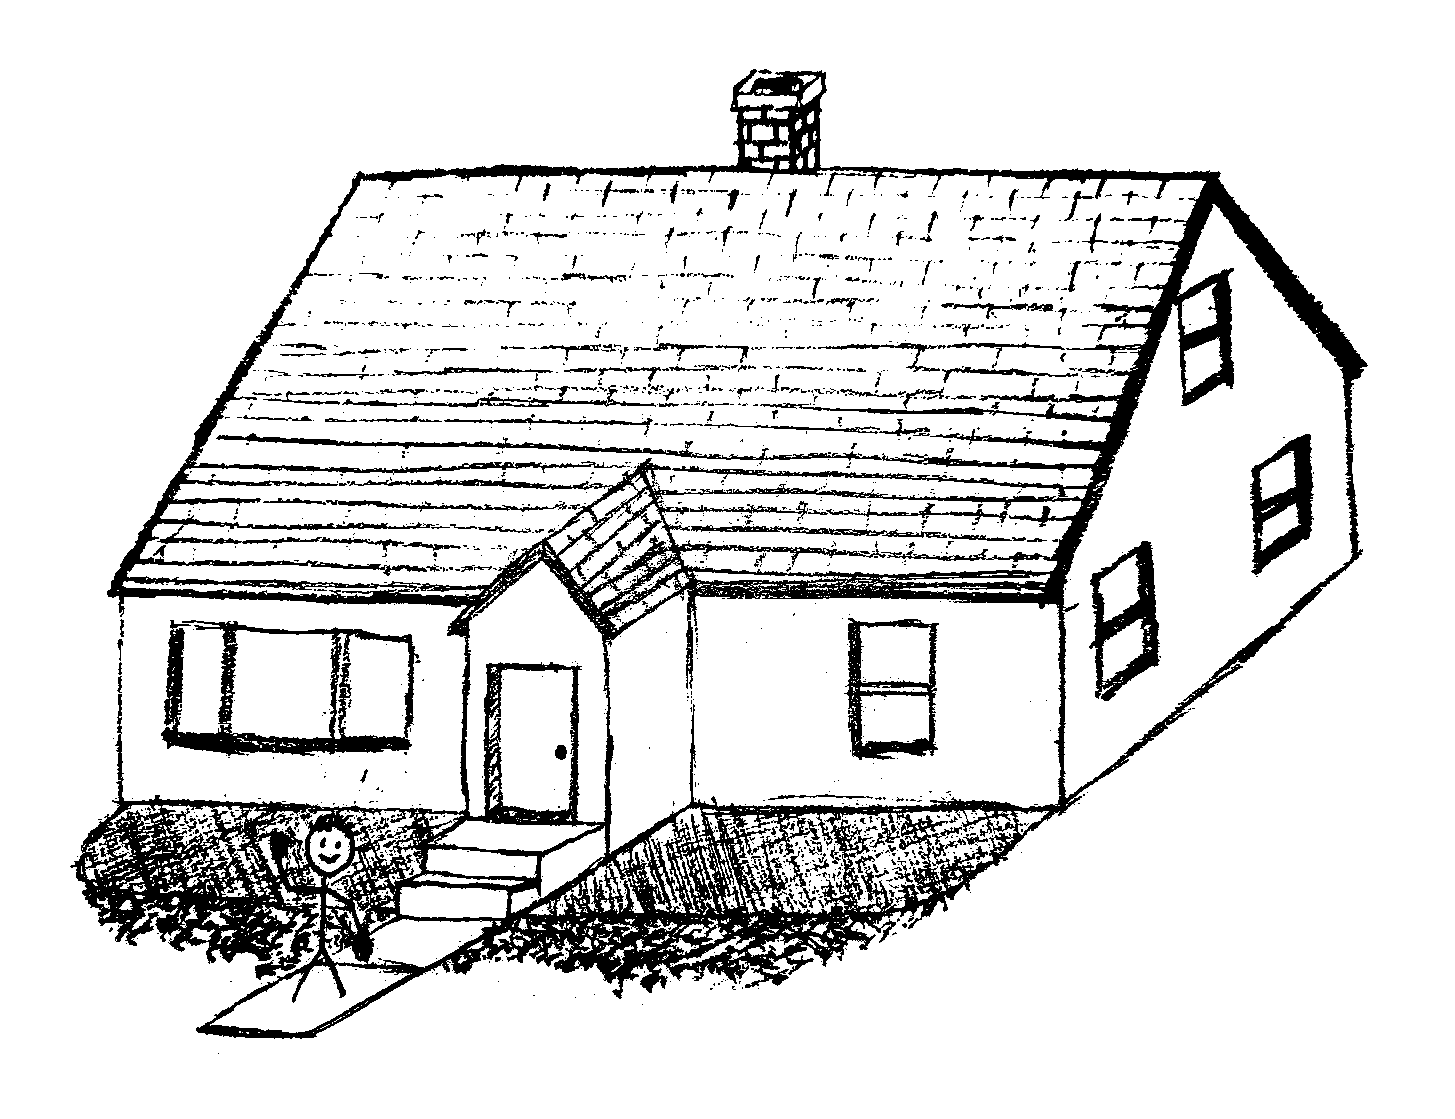 A sketch of a house similar to Brian's